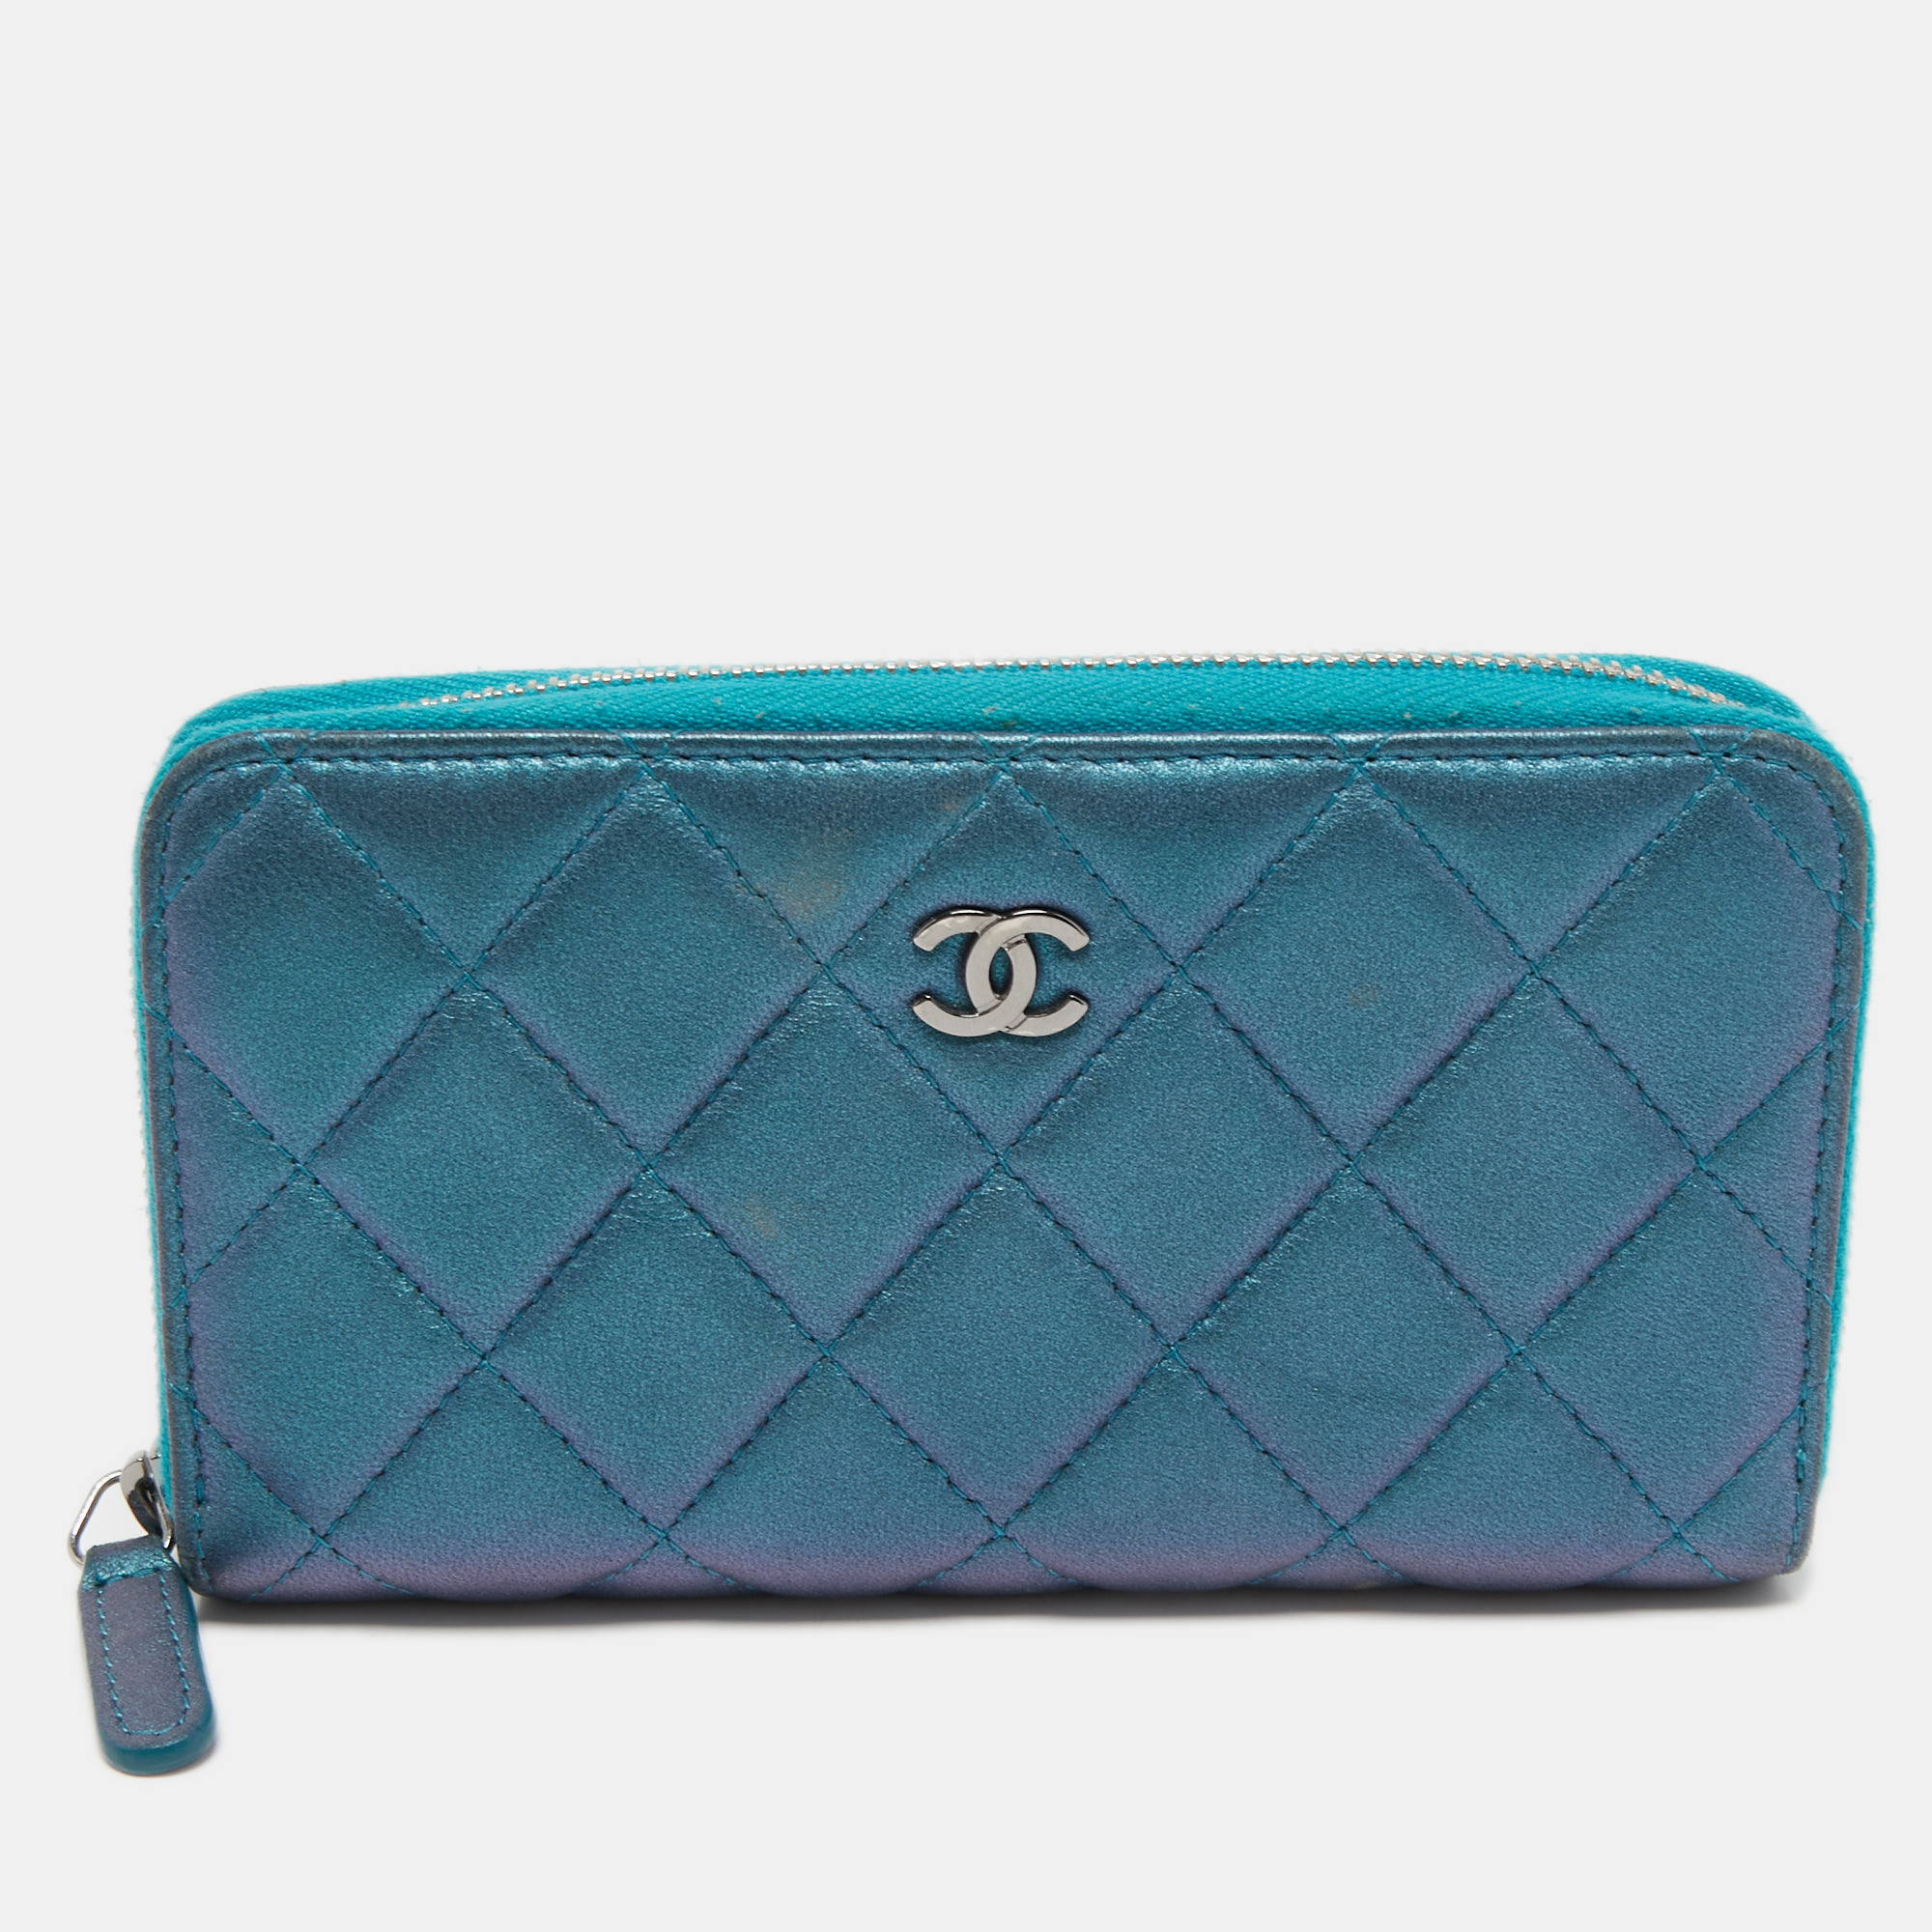 Pre-owned Chanel Metallic Blue Quilted Leather Classic Zip Wallet